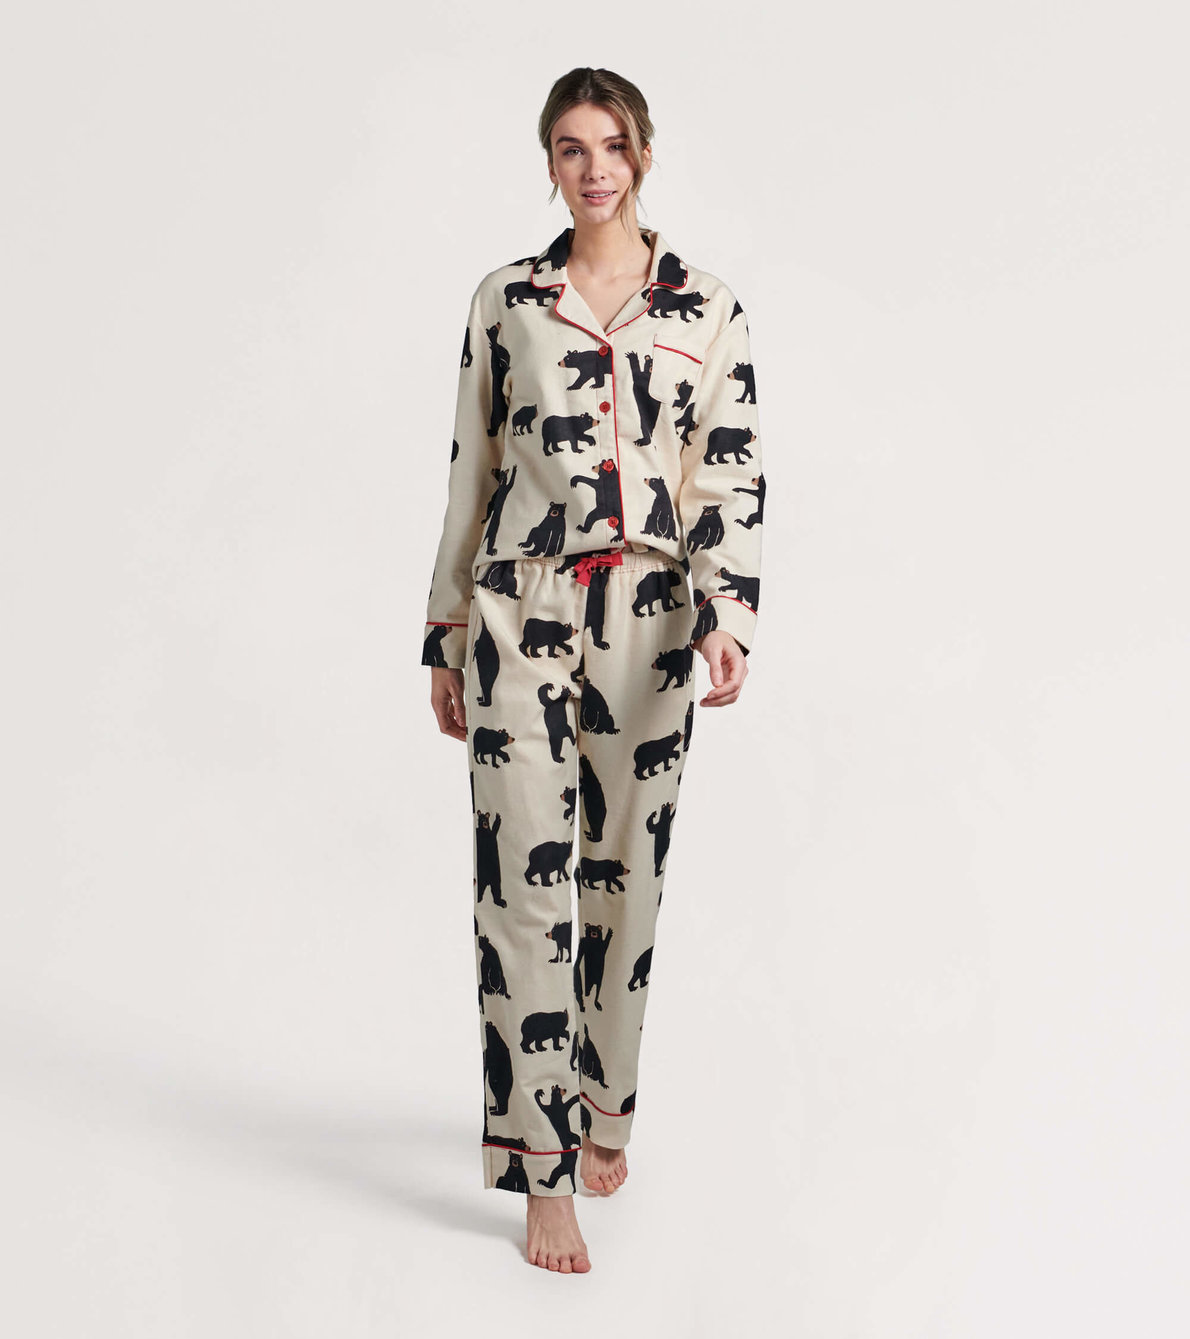 View larger image of Women's Black Bears Flannel Pajama Set